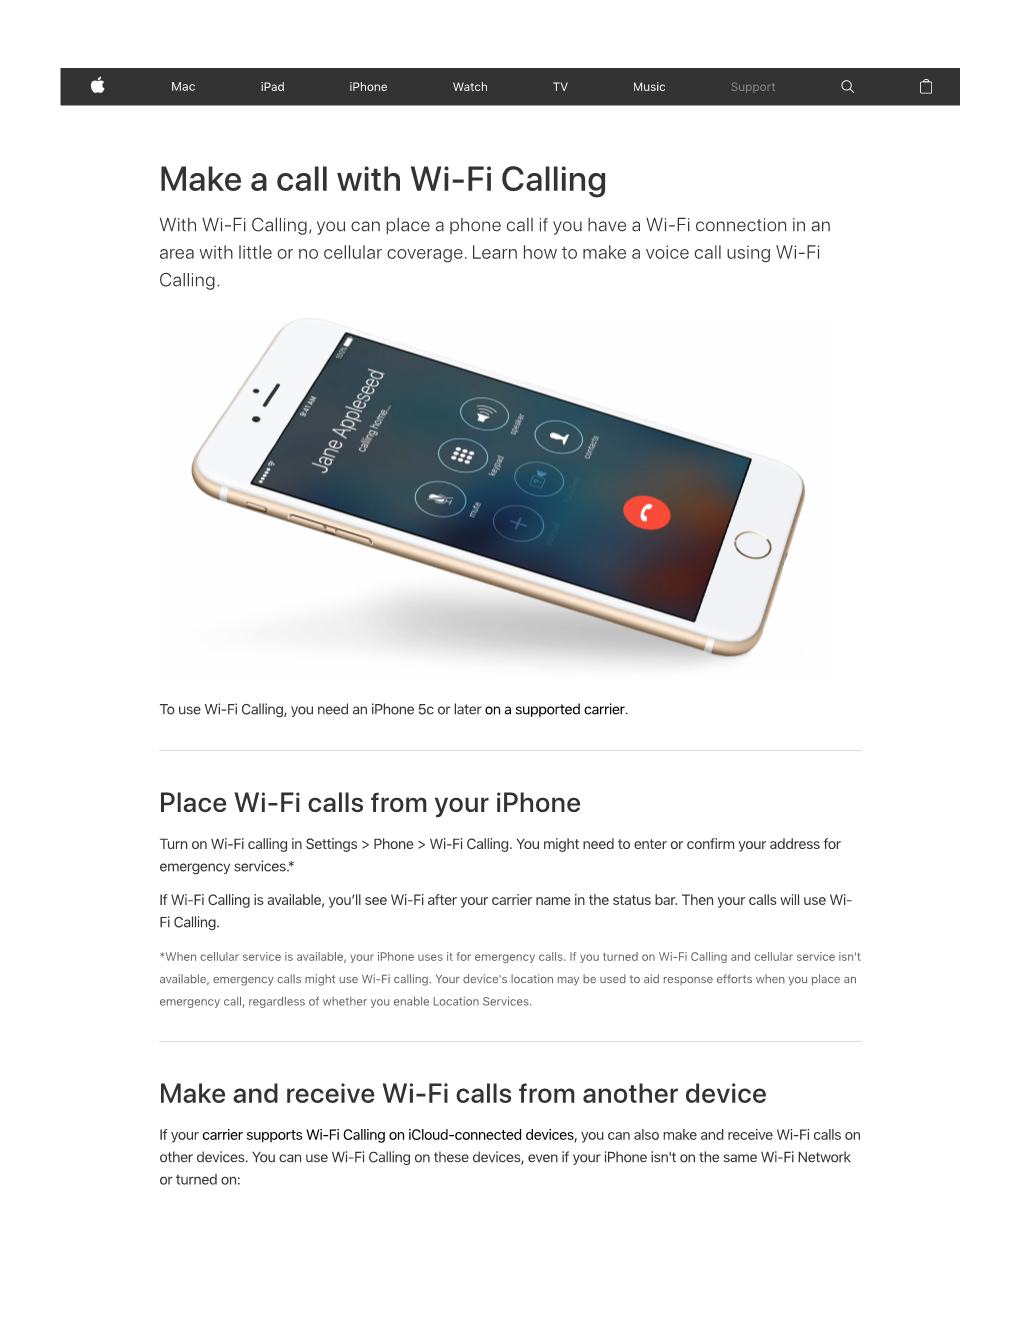 Make a Call with Wi-Fi Calling with Wi-Fi Calling, You Can Place a Phone Call If You Have a Wi-Fi Connection in an Area with Little Or No Cellular Coverage